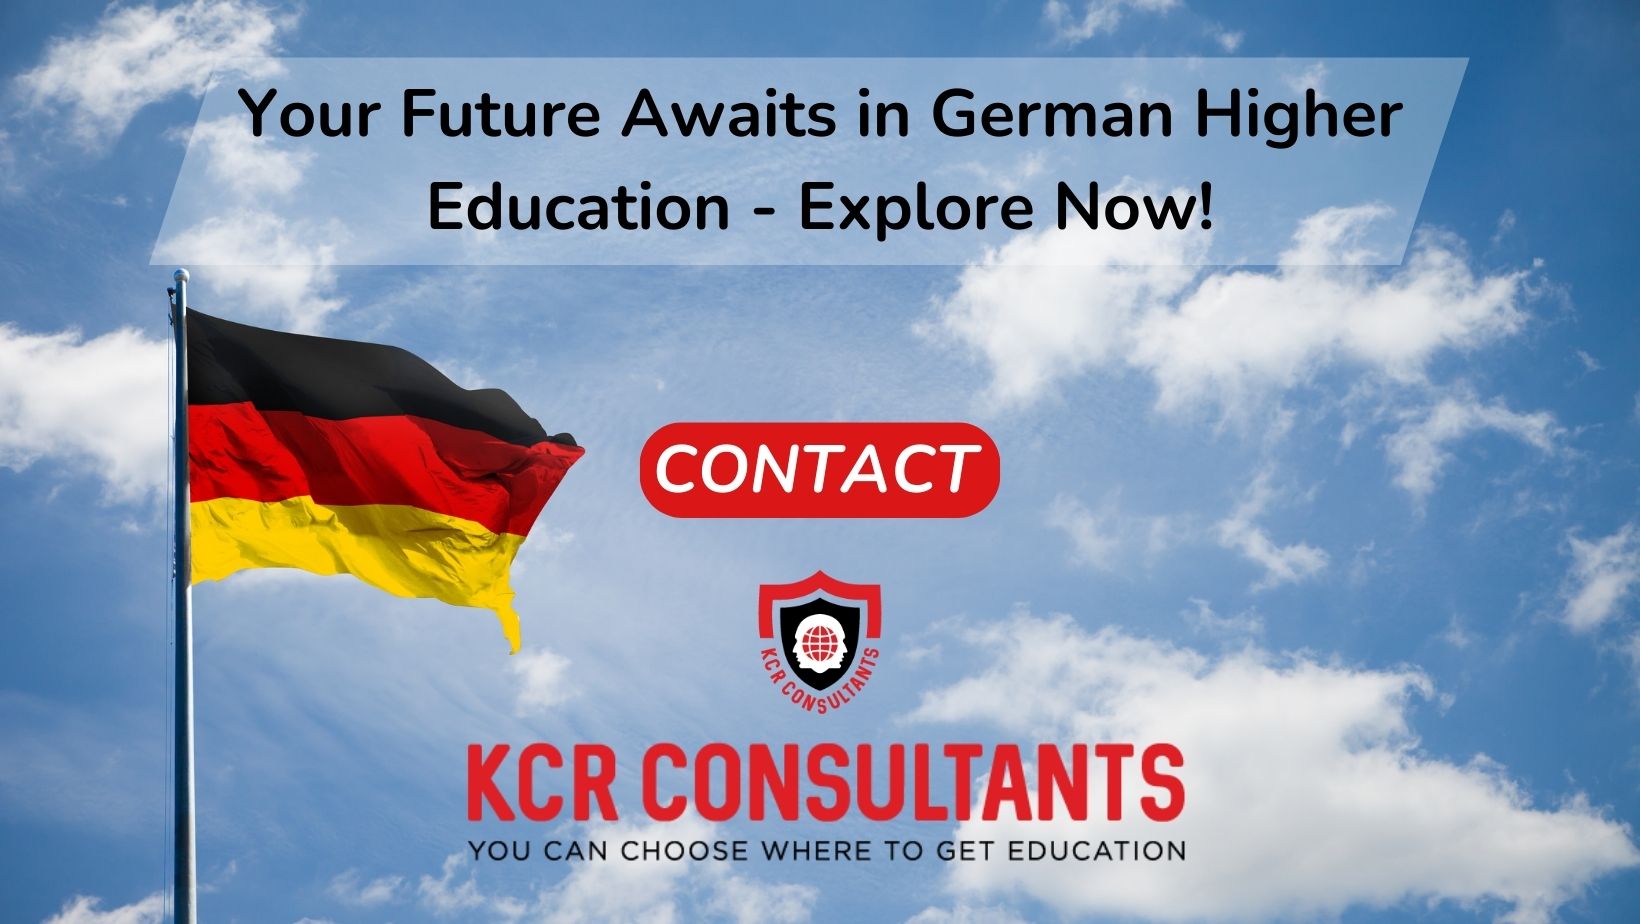 German Higher Education - KCR CONSULTANTS - Contact us